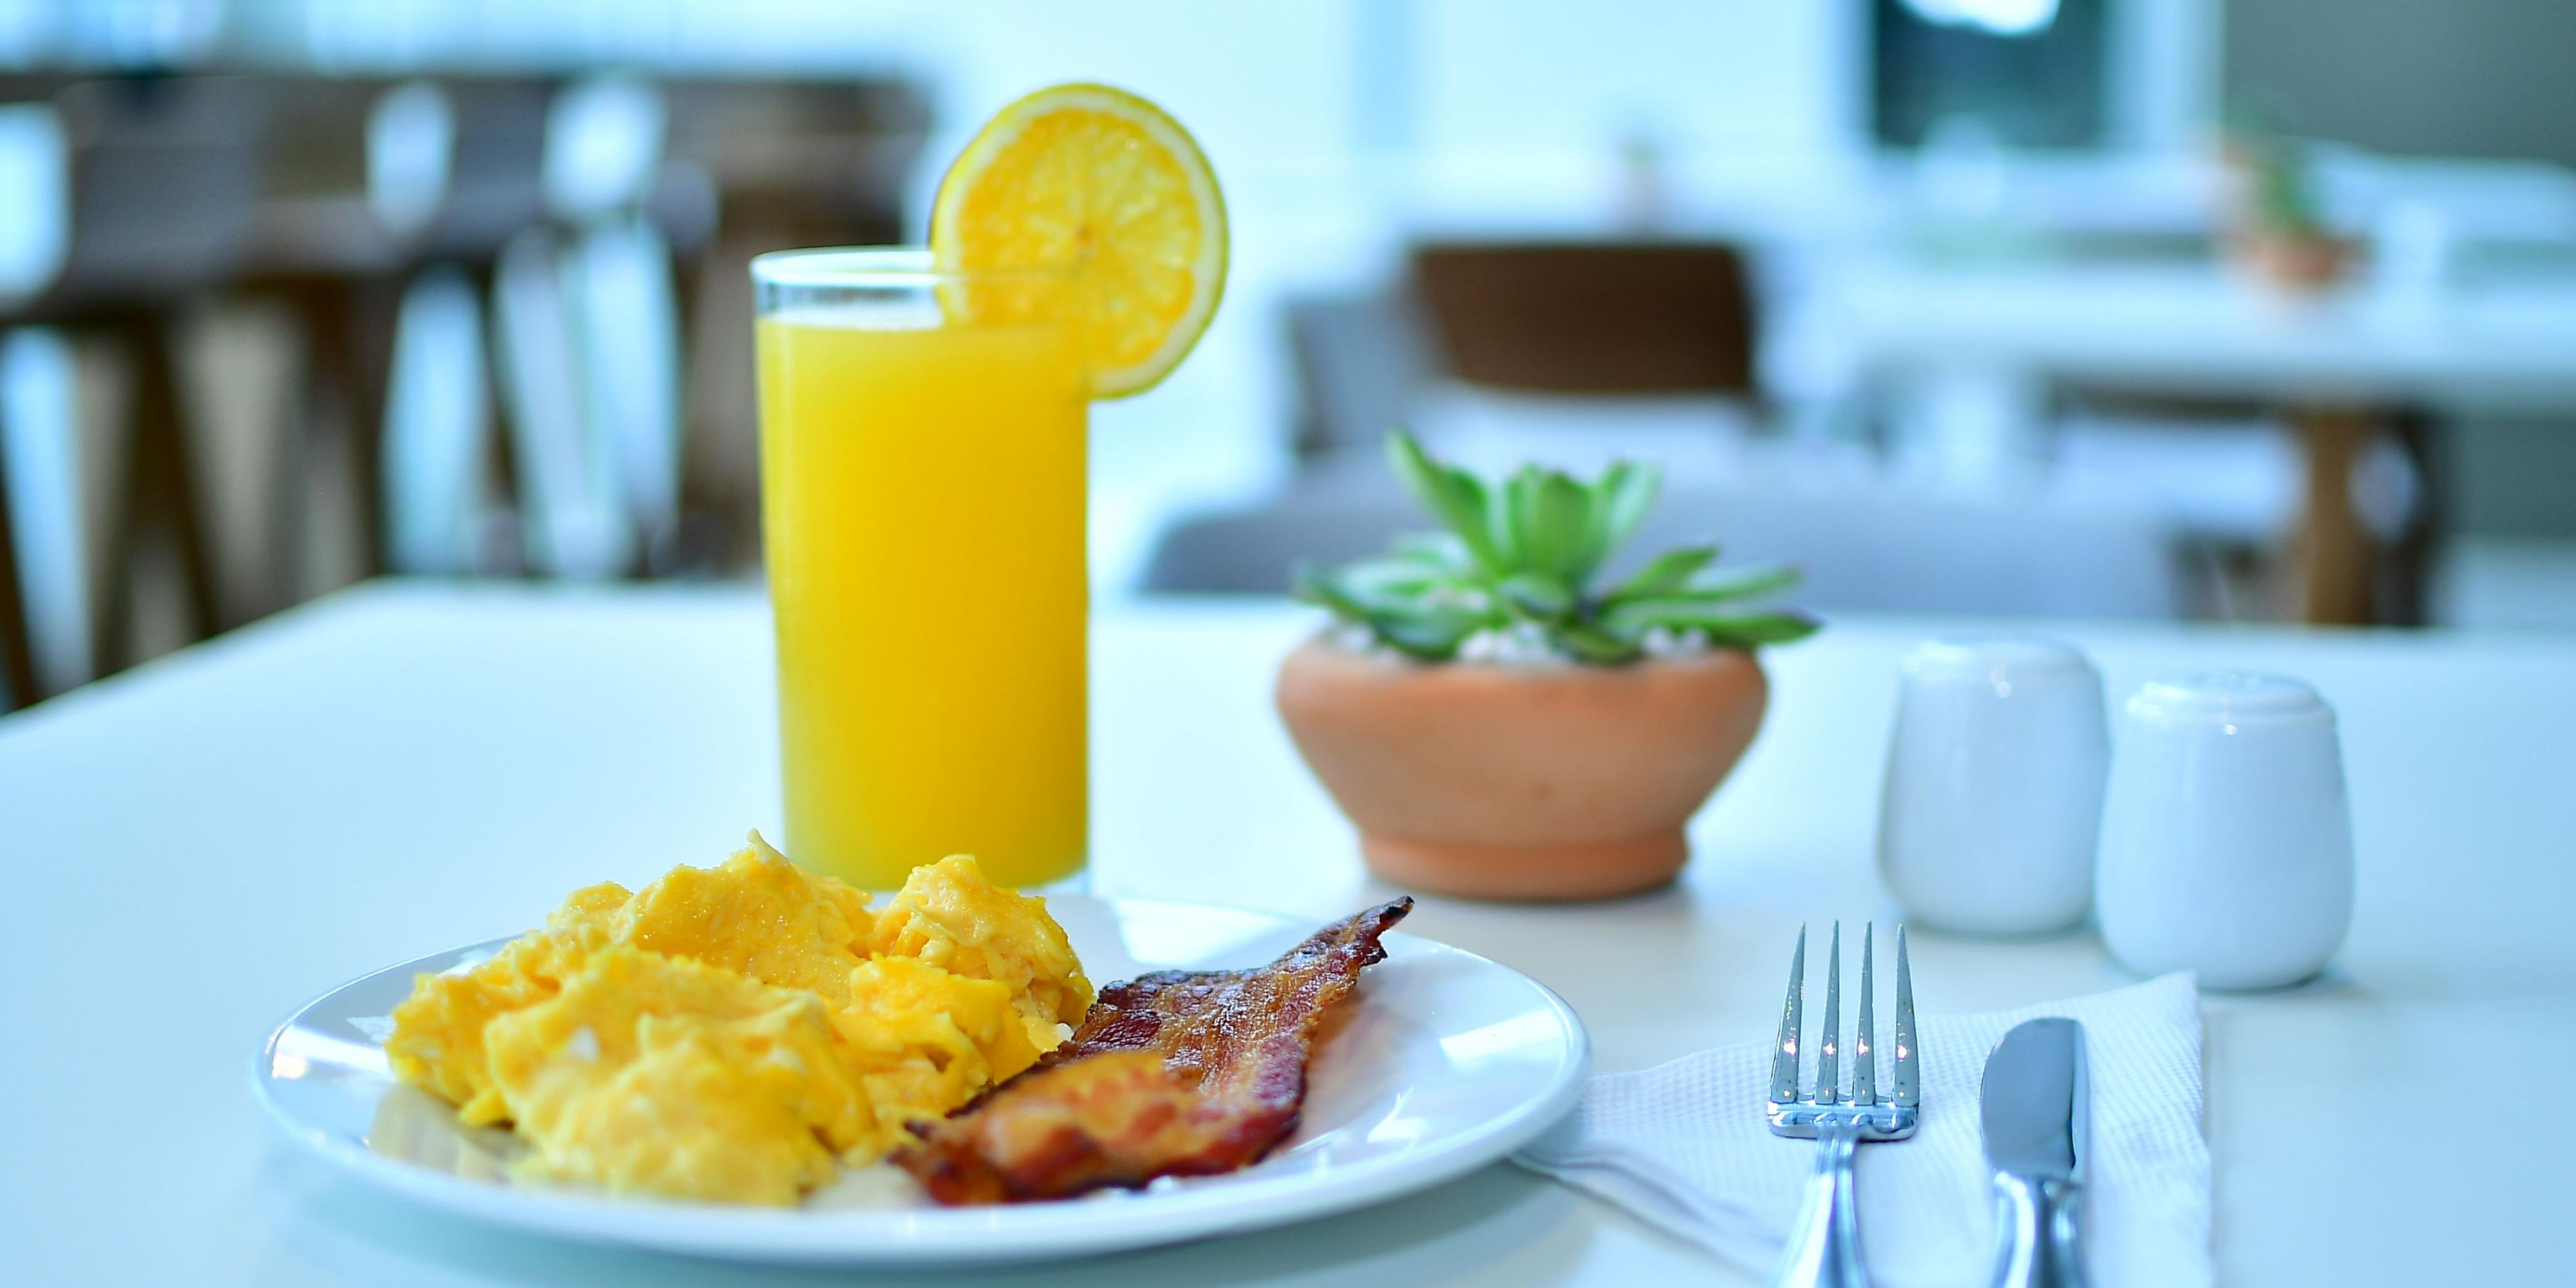 Start your day with our free Express Start Breakfast, which includes: scrambled eggs, bacon, sausages, 3 options of regional dishes, bread station, fruits, cereal station, varieties of juices, coffee and tea.  Offered from 06:00 AM to 10:30 AM